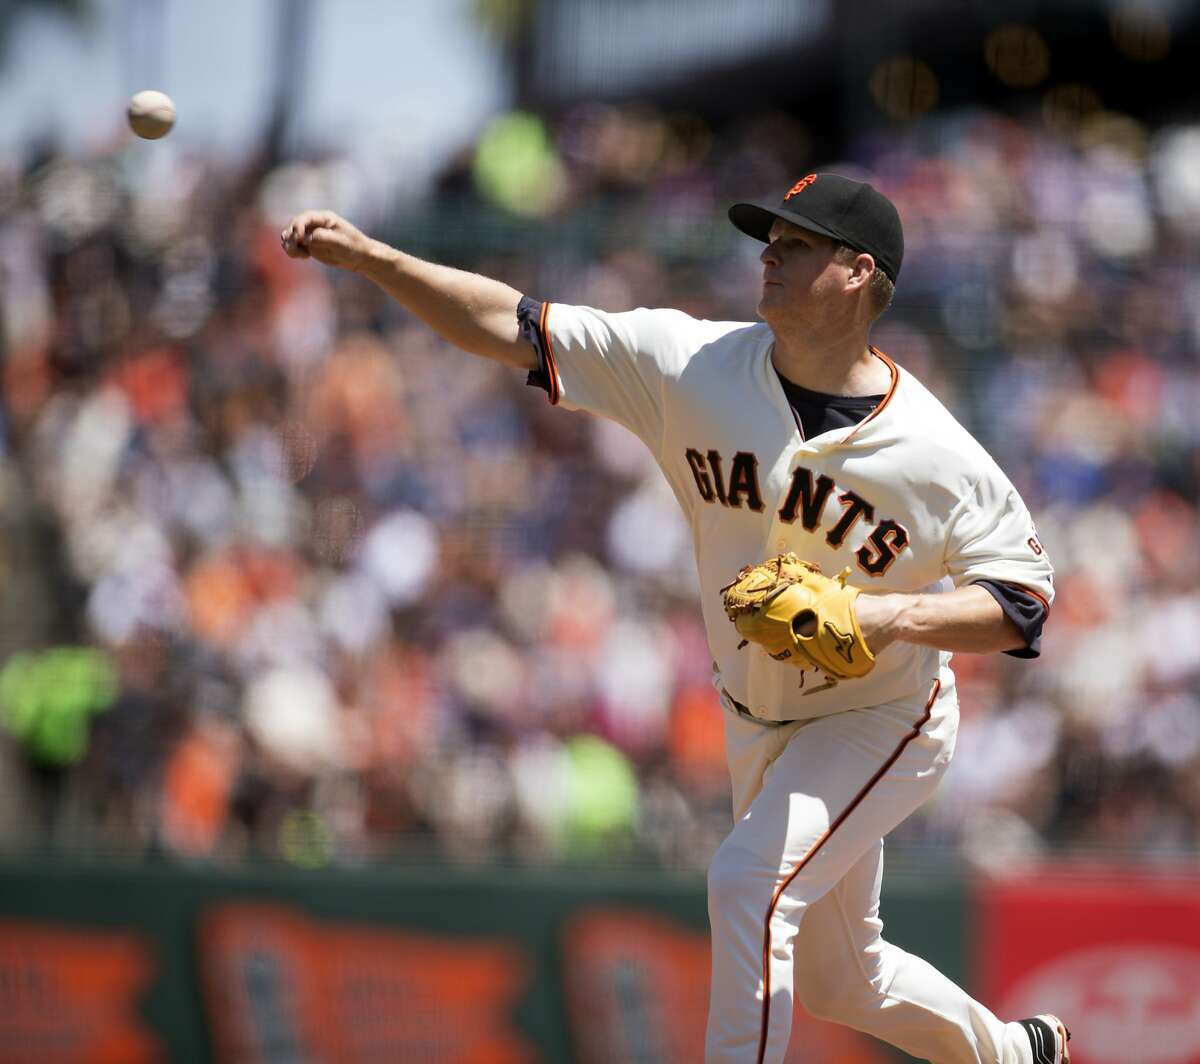 San Francisco Giants starting pitcher Matt Cain delivers against the Washington Nationals during the first inning of a baseball game Sunday, July 31, 2016, in San Francisco. (AP Photo/D. Ross Cameron)